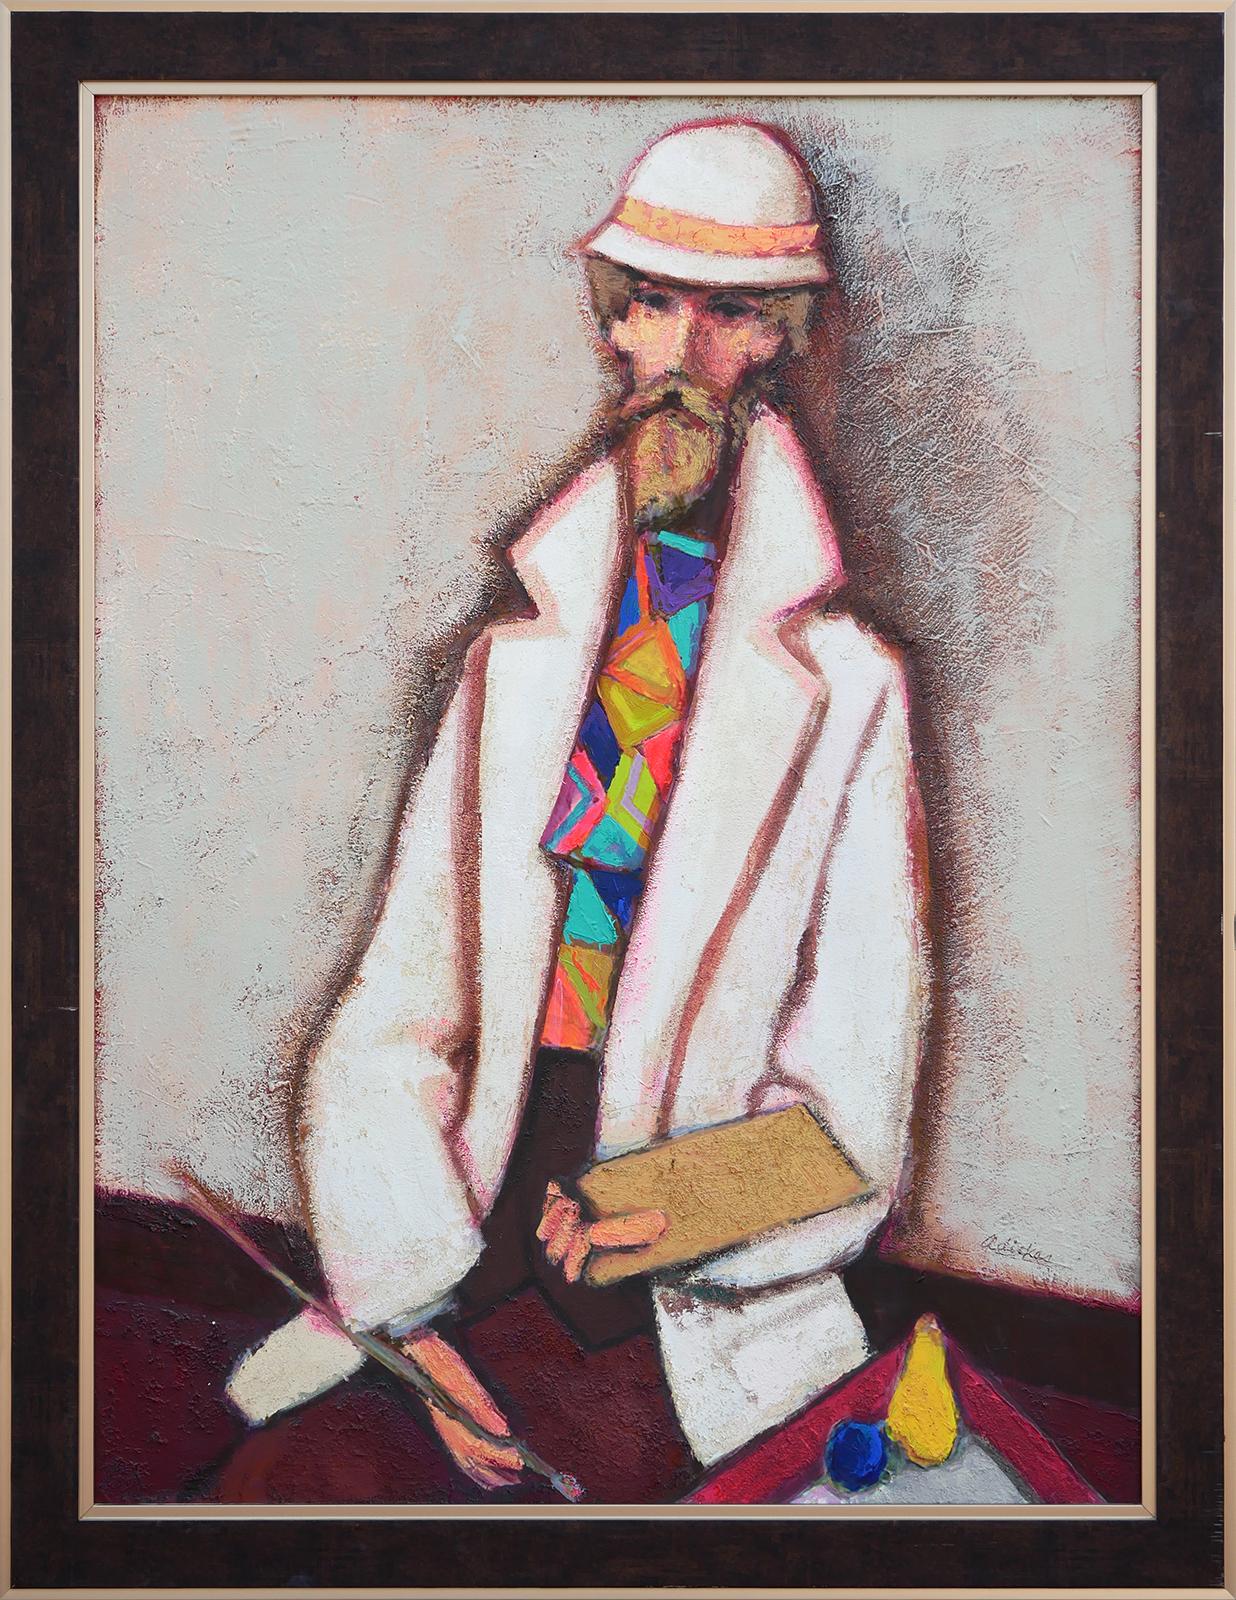 David Adickes Abstract Painting - "Artist White Suit, Wild Tie" Colorful Modern Abstract Portrait Painting